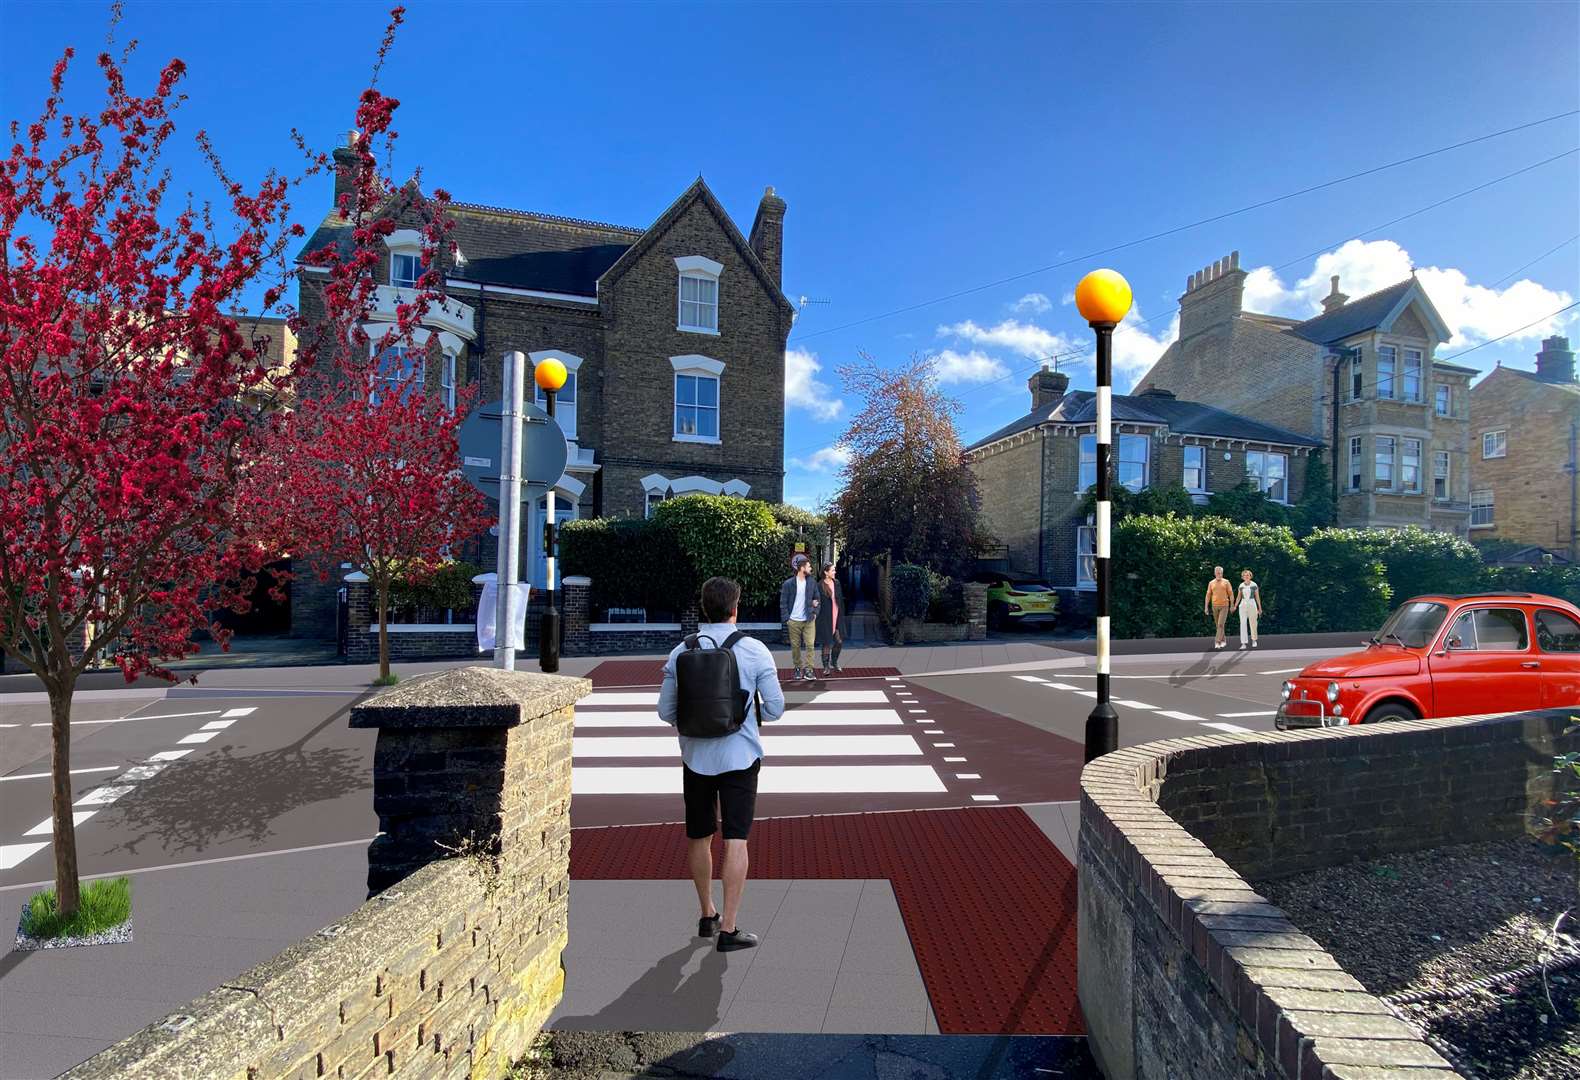 Dropped kerbs, new crossings, raised table junctions will be installed. Picture: Faversham Town Council/Space Syntax